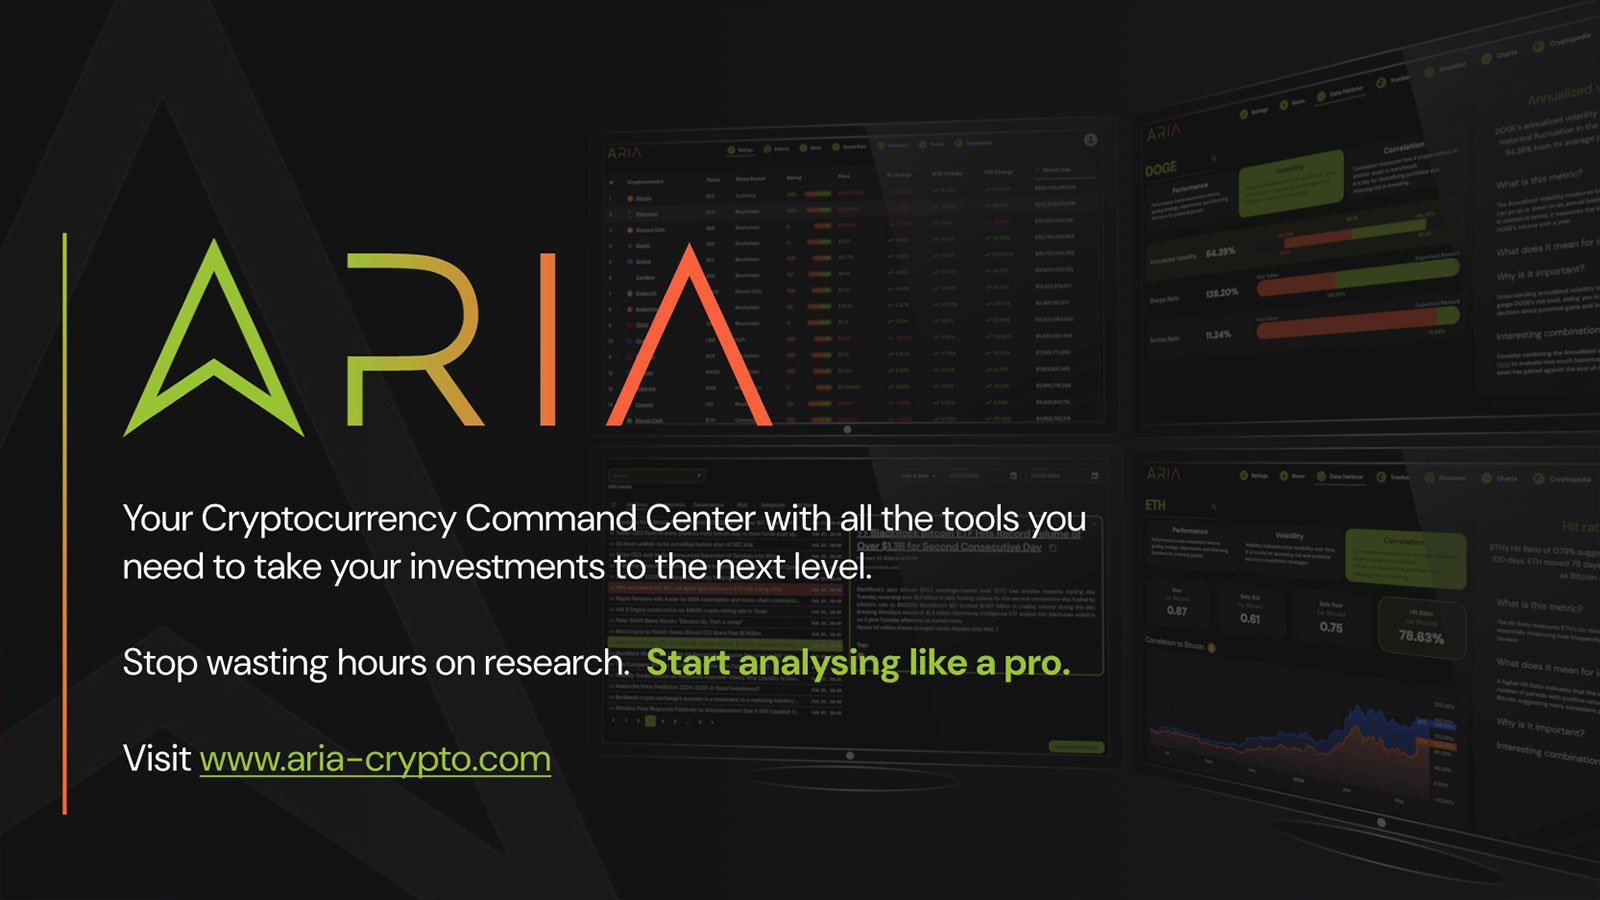 ARIA Introduces New Platform to Revolutionise Crypto Investments with Comprehensive Data and AI-Driven Tools